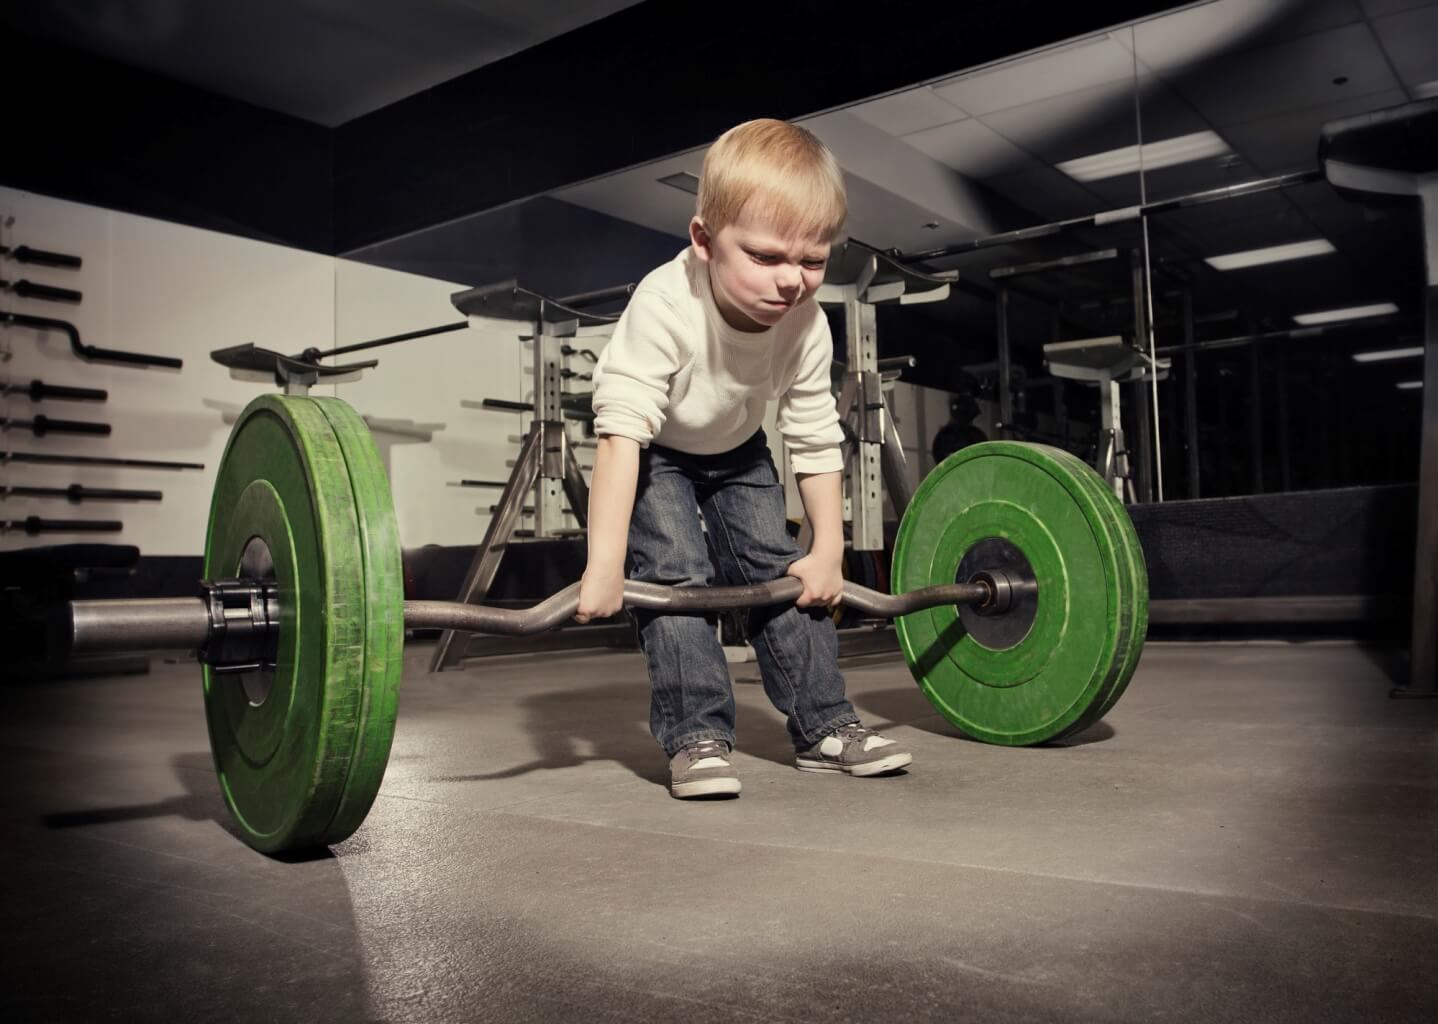 A young blond boy, wearing jeans and a long-sleeved tee shirt, is in a gym. He is trying to lift a weight that weighs more than he does. He has a determined look on his face. 